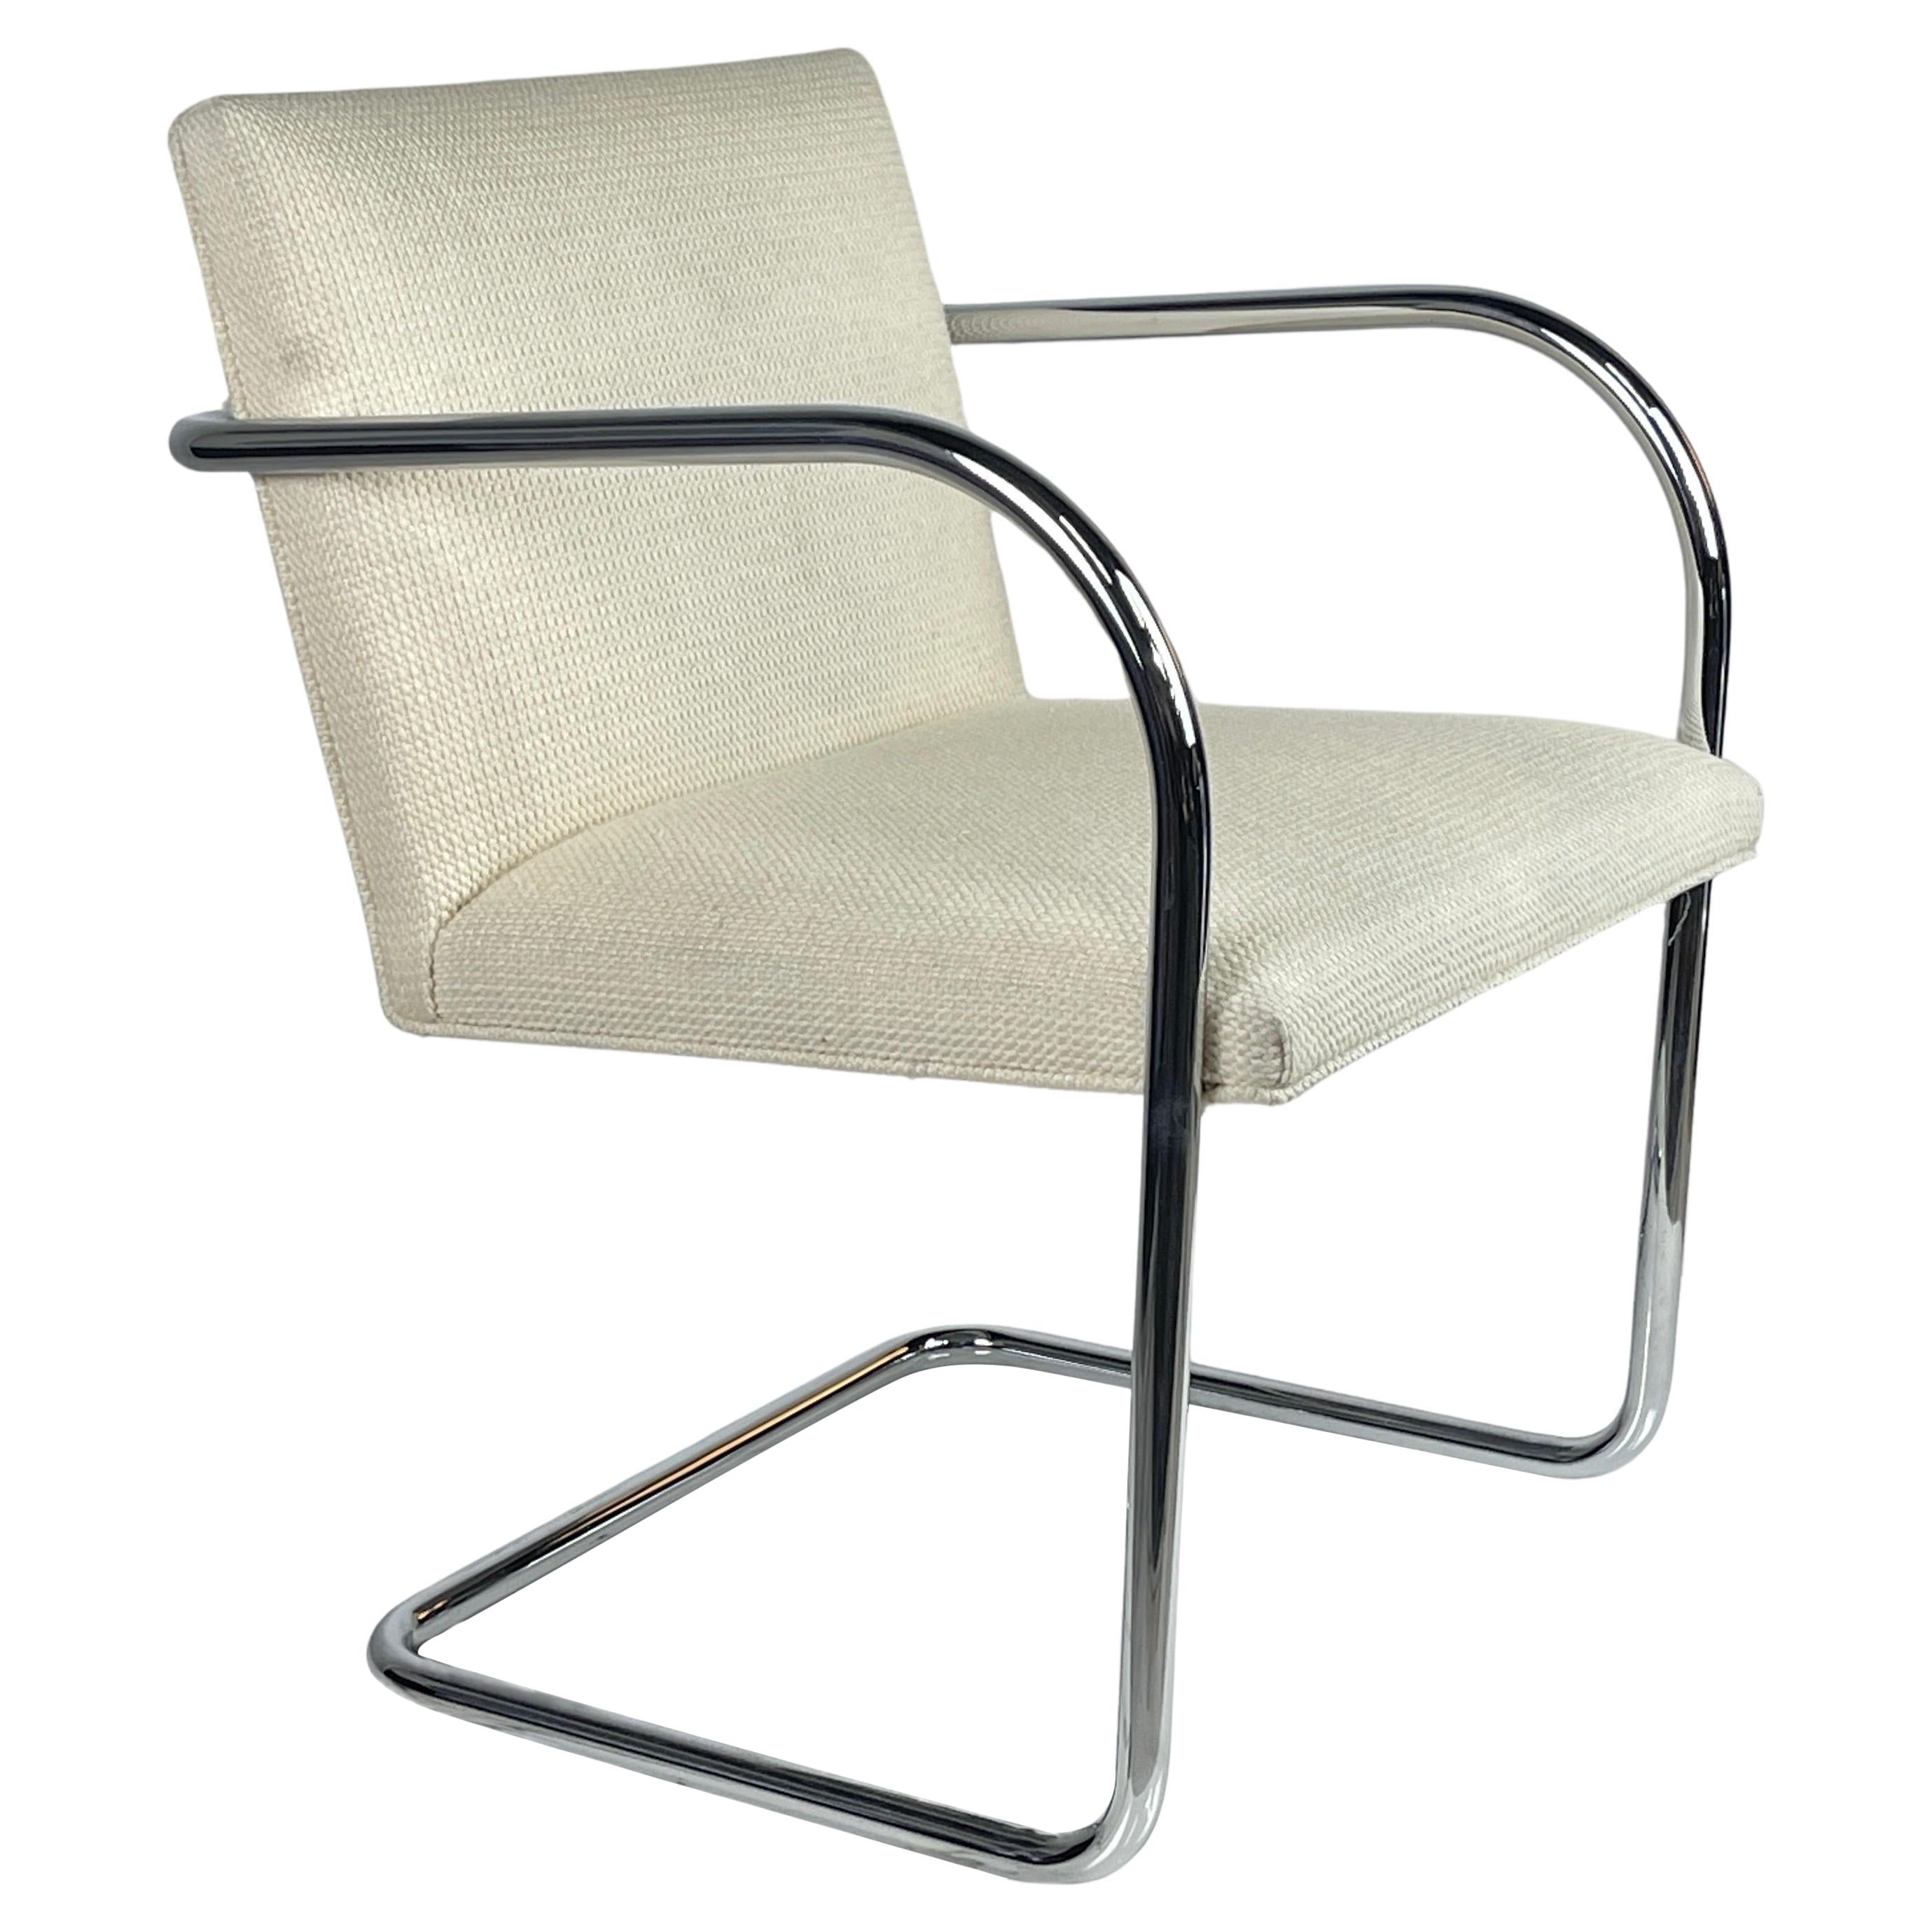 Mies Van Der Rohe for Knoll Brno Chair in Cato Upholstery 60 available